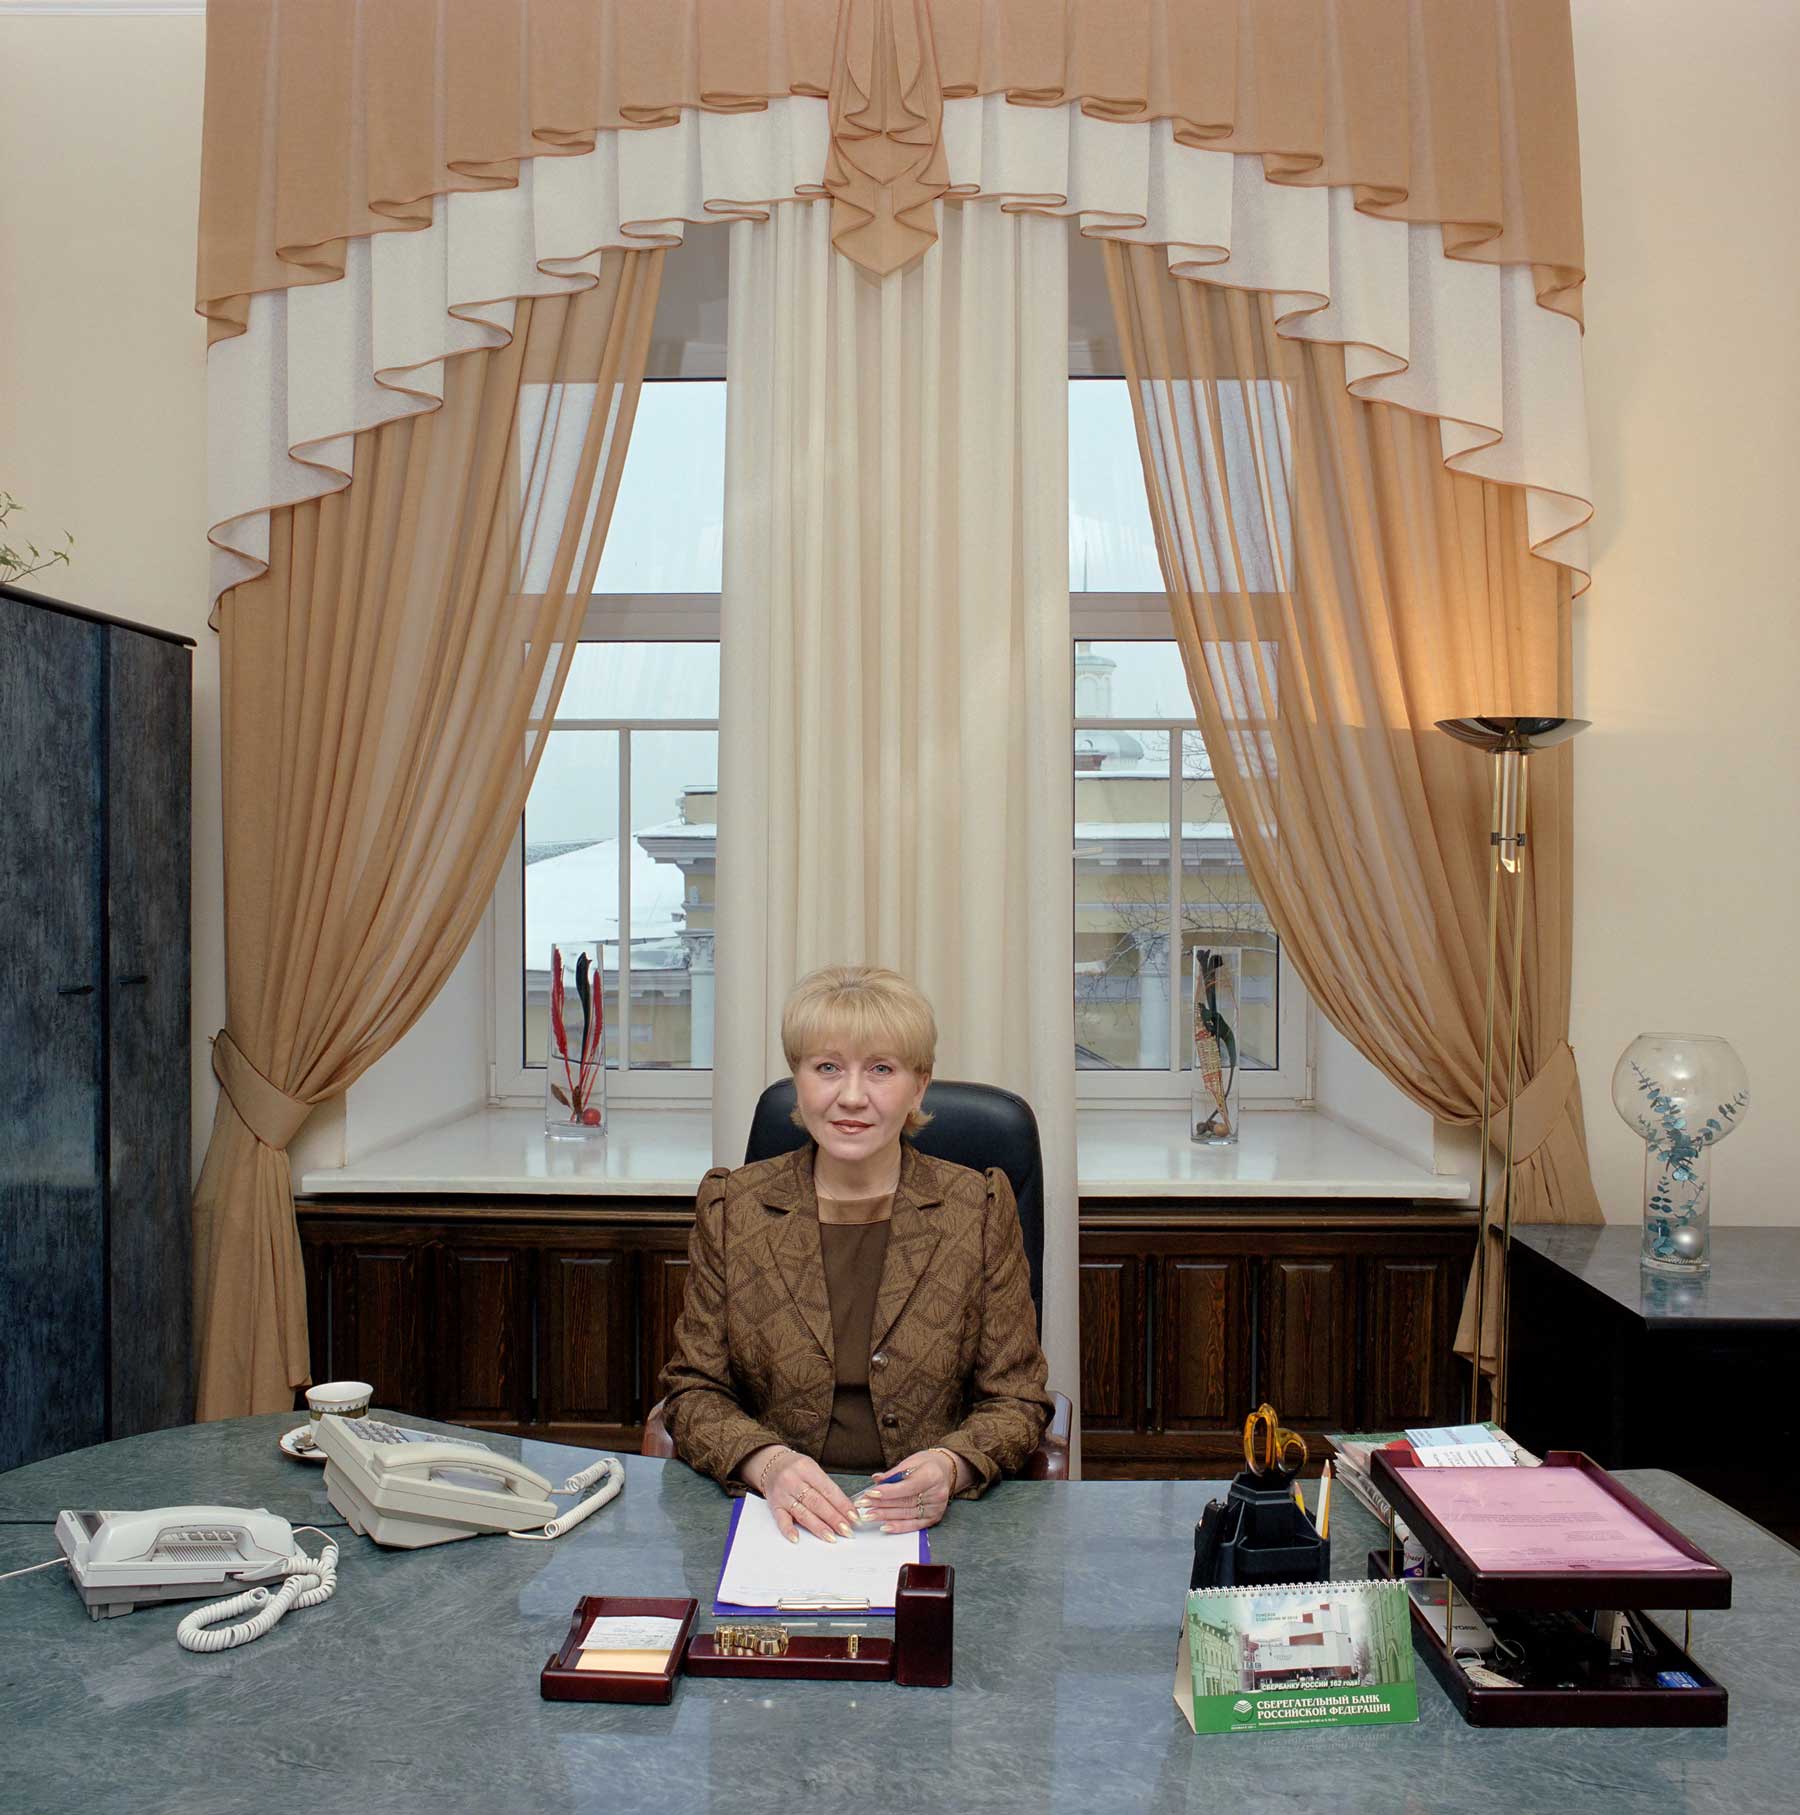 Russia-25/2004 [Tom., LVM (b. 1959)]
Lyudmila Vasilyevna Malkova (b. 1959) is a secretary to the mayor of the city of Tomsk, Tomsk province. She and her colleague take turns, working every other day, seven days a week, at least 12 hours a day. Monthly salary: 10,500 rubles ($ 375, euro 285).